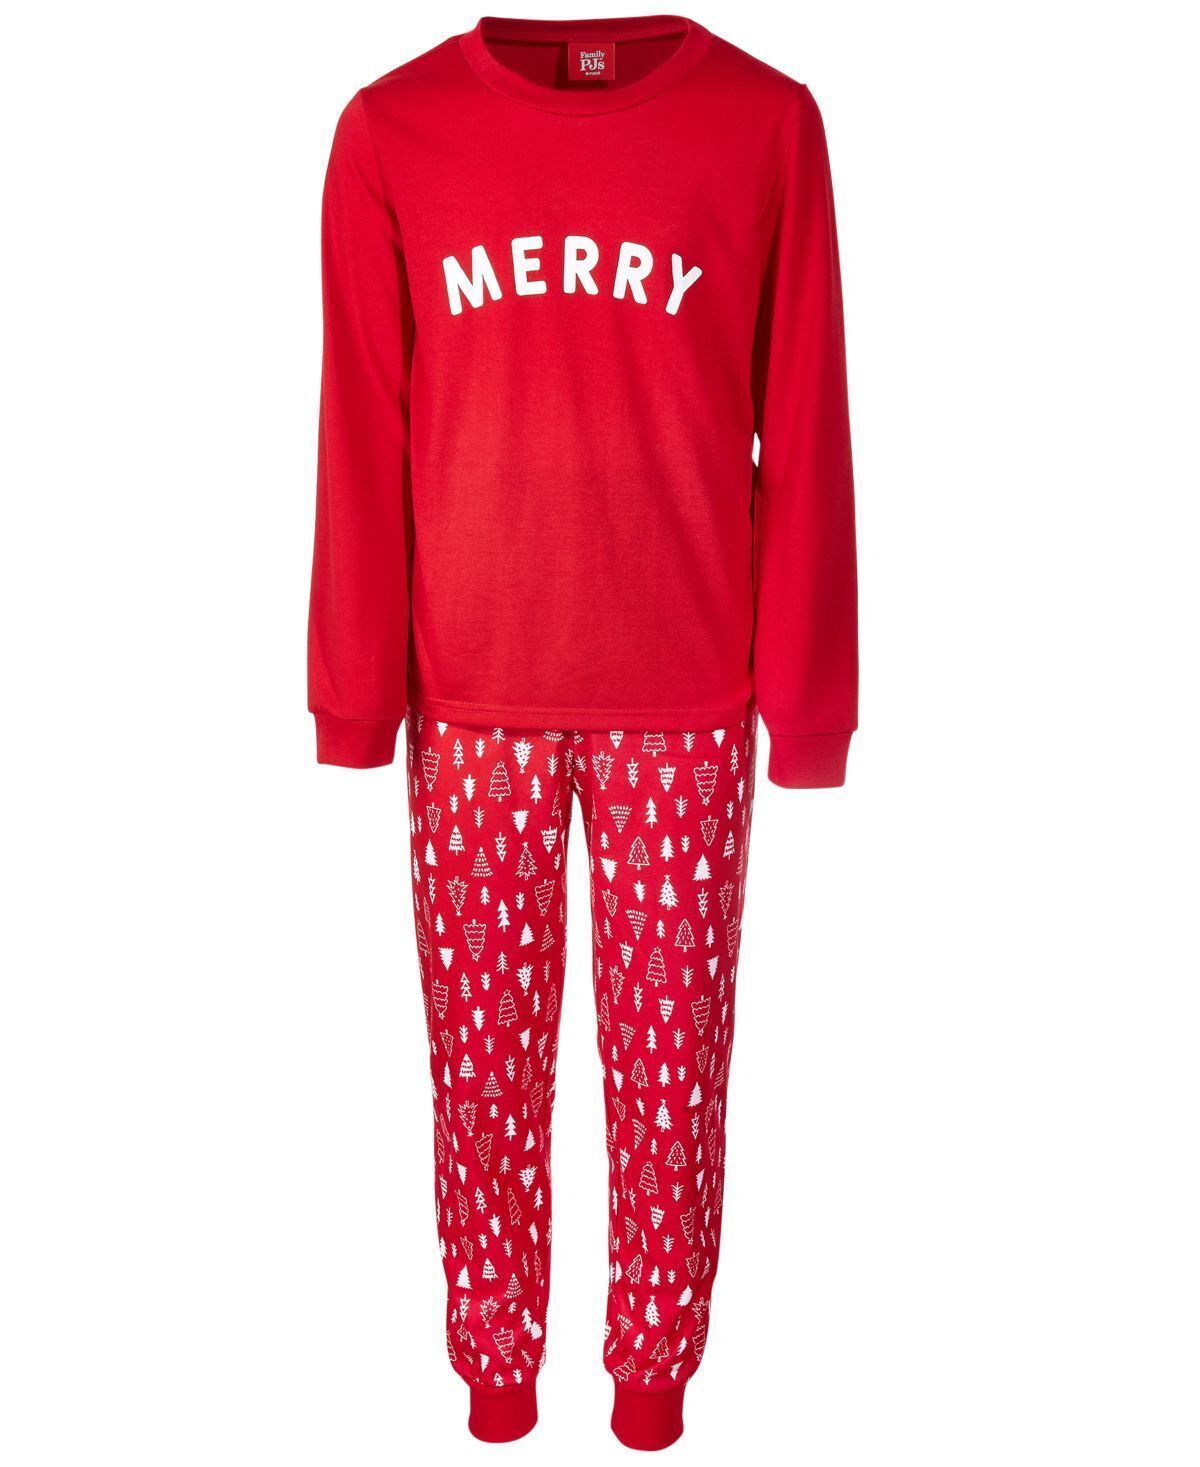 Primary image for allbrand365 designer Little & Big Kids 2-Pieces Merry Pajama Set,Merry Red,10-12